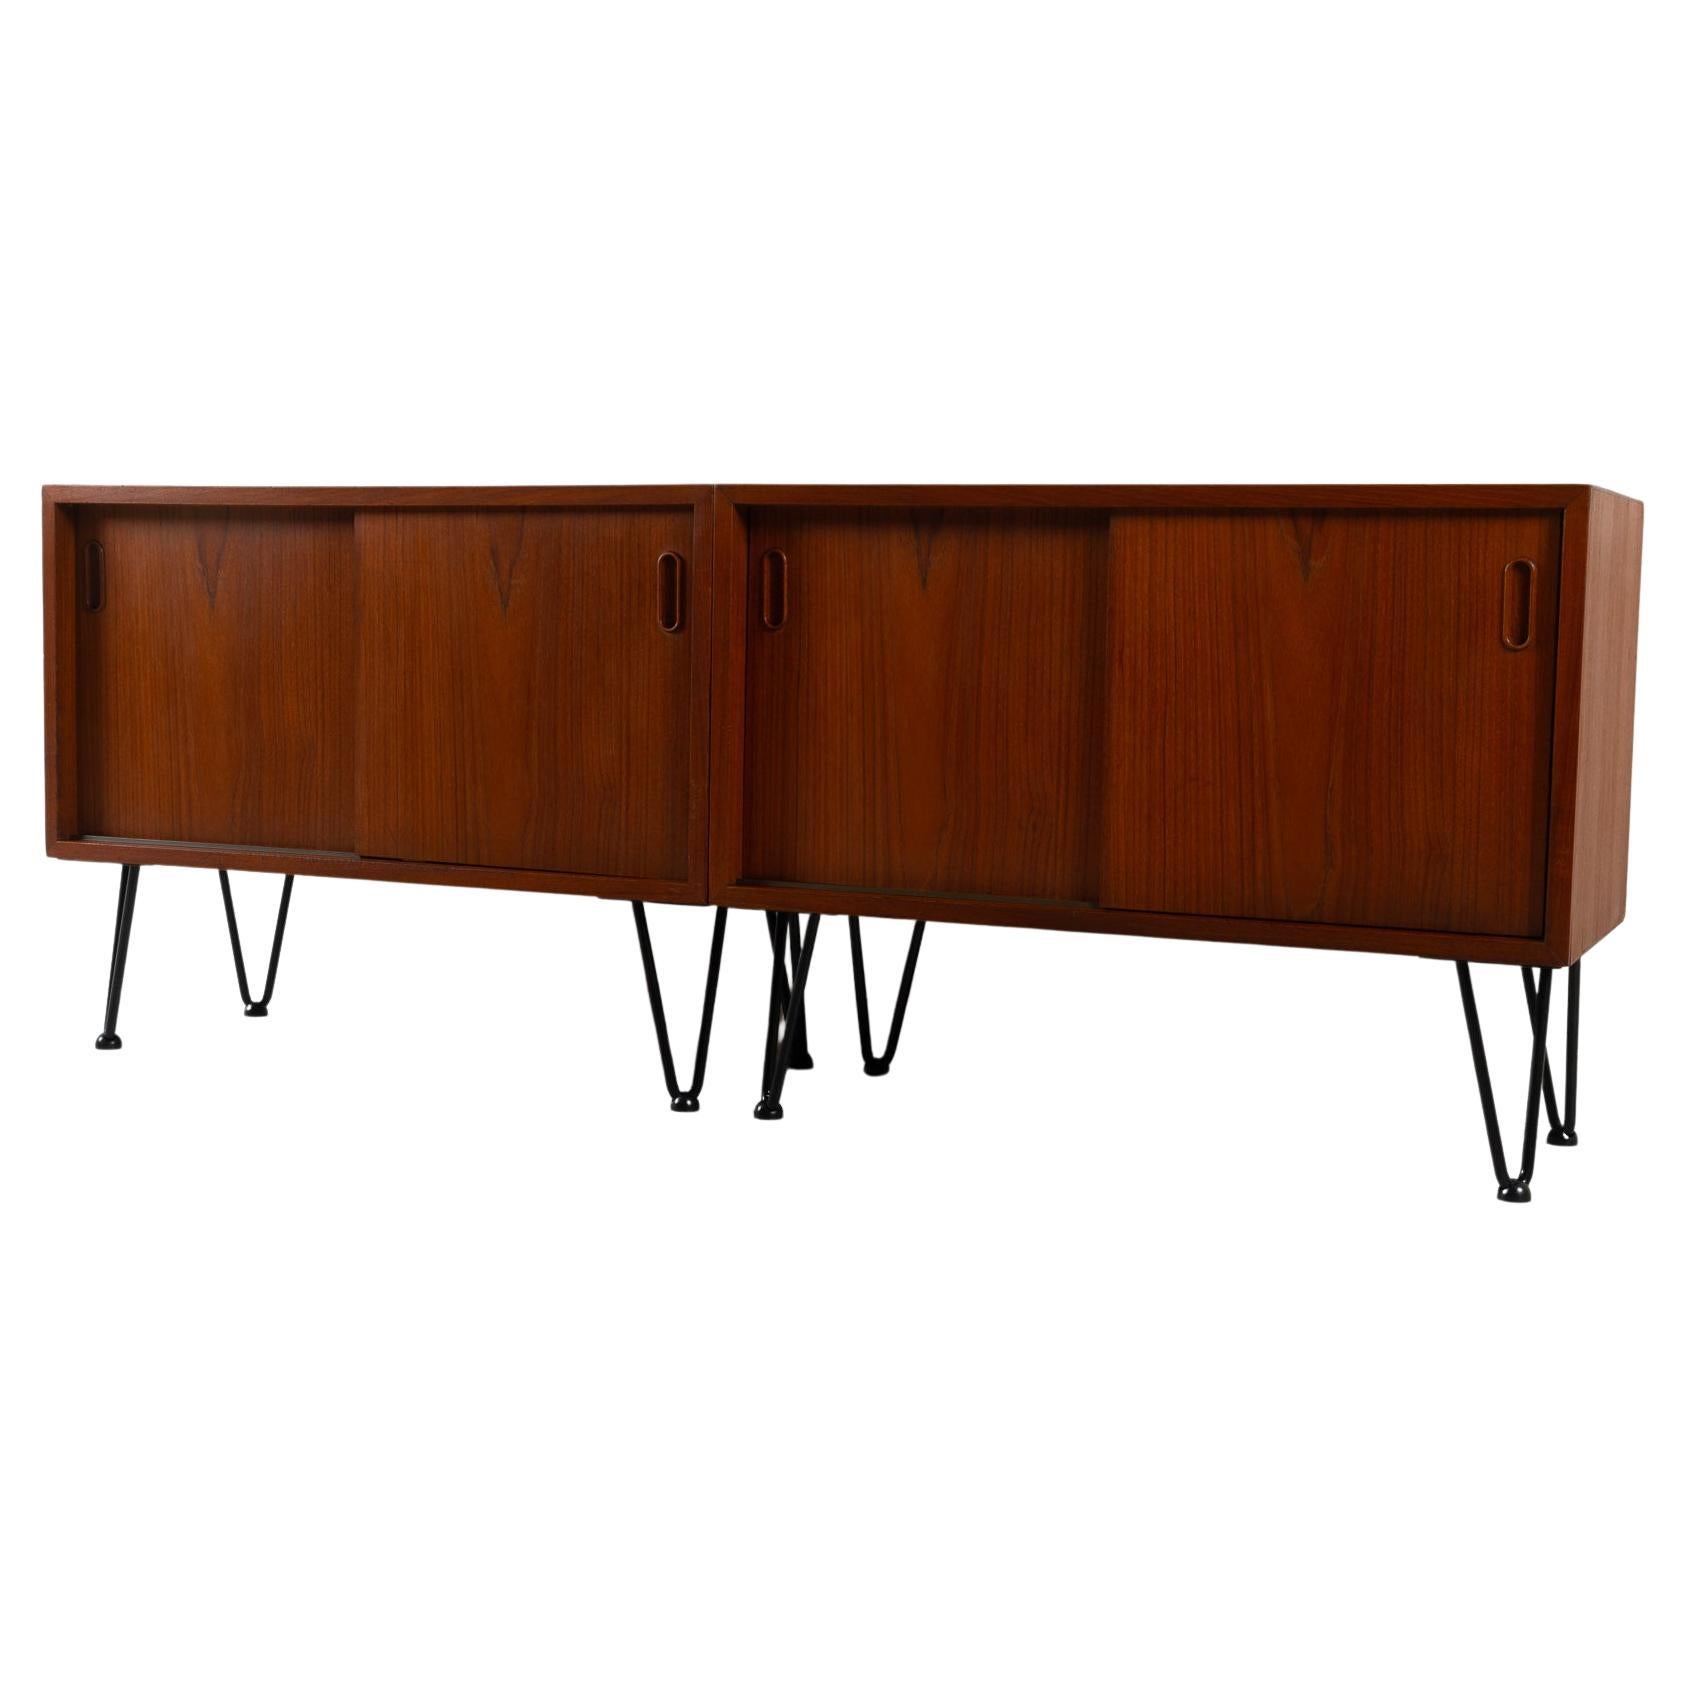 Pair of vintage Danish teak cabinets 1960s
Set of two matching teak cabinets with double sliding doors and each with one shelf. 
Can be used individually or together as a long low sideboard. Also suitable as bedside tables or side tables. 

Good